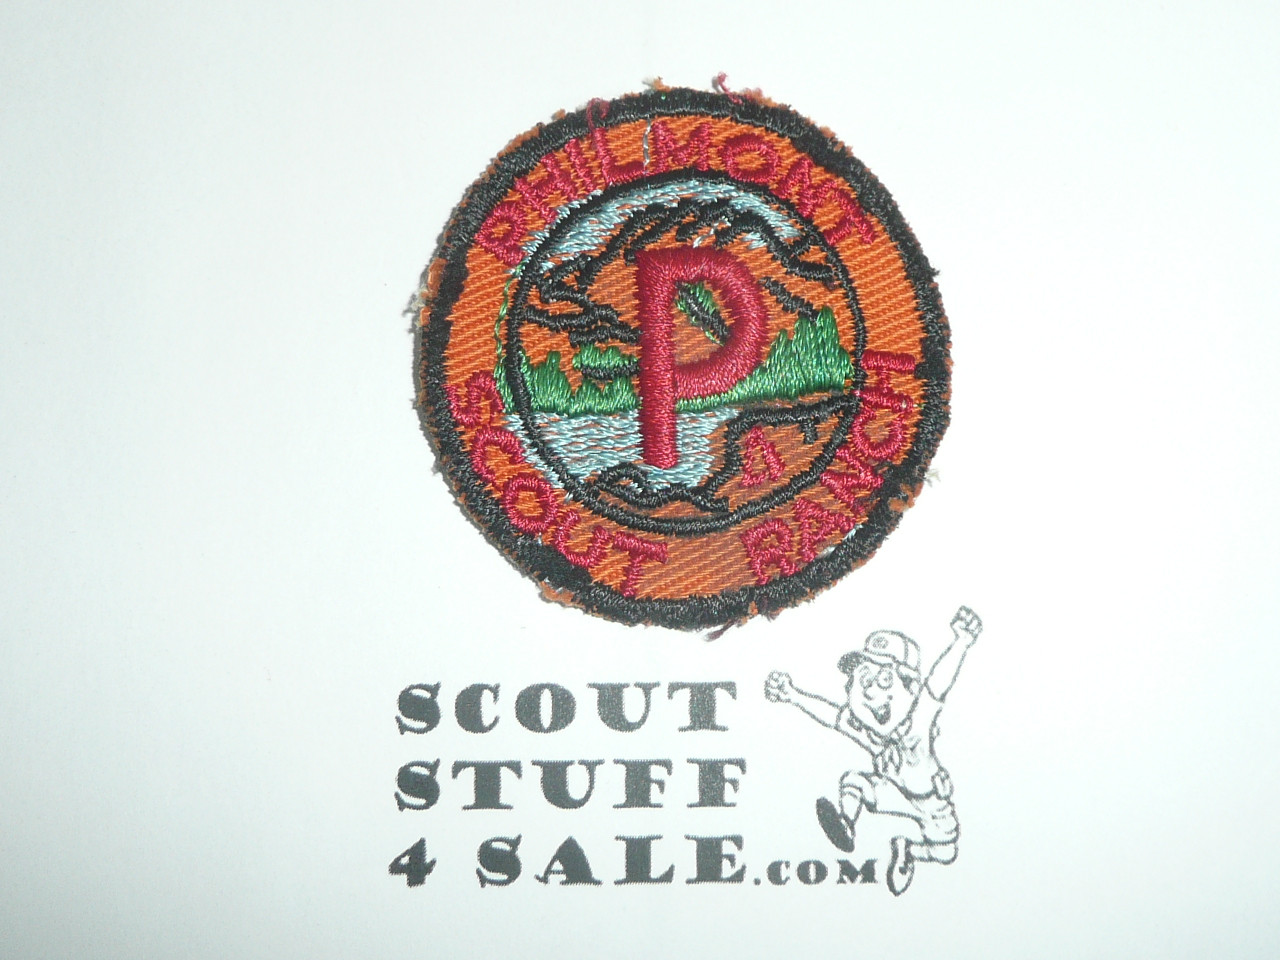 Philmont Scout Ranch, Philmont Dollar Patch, used